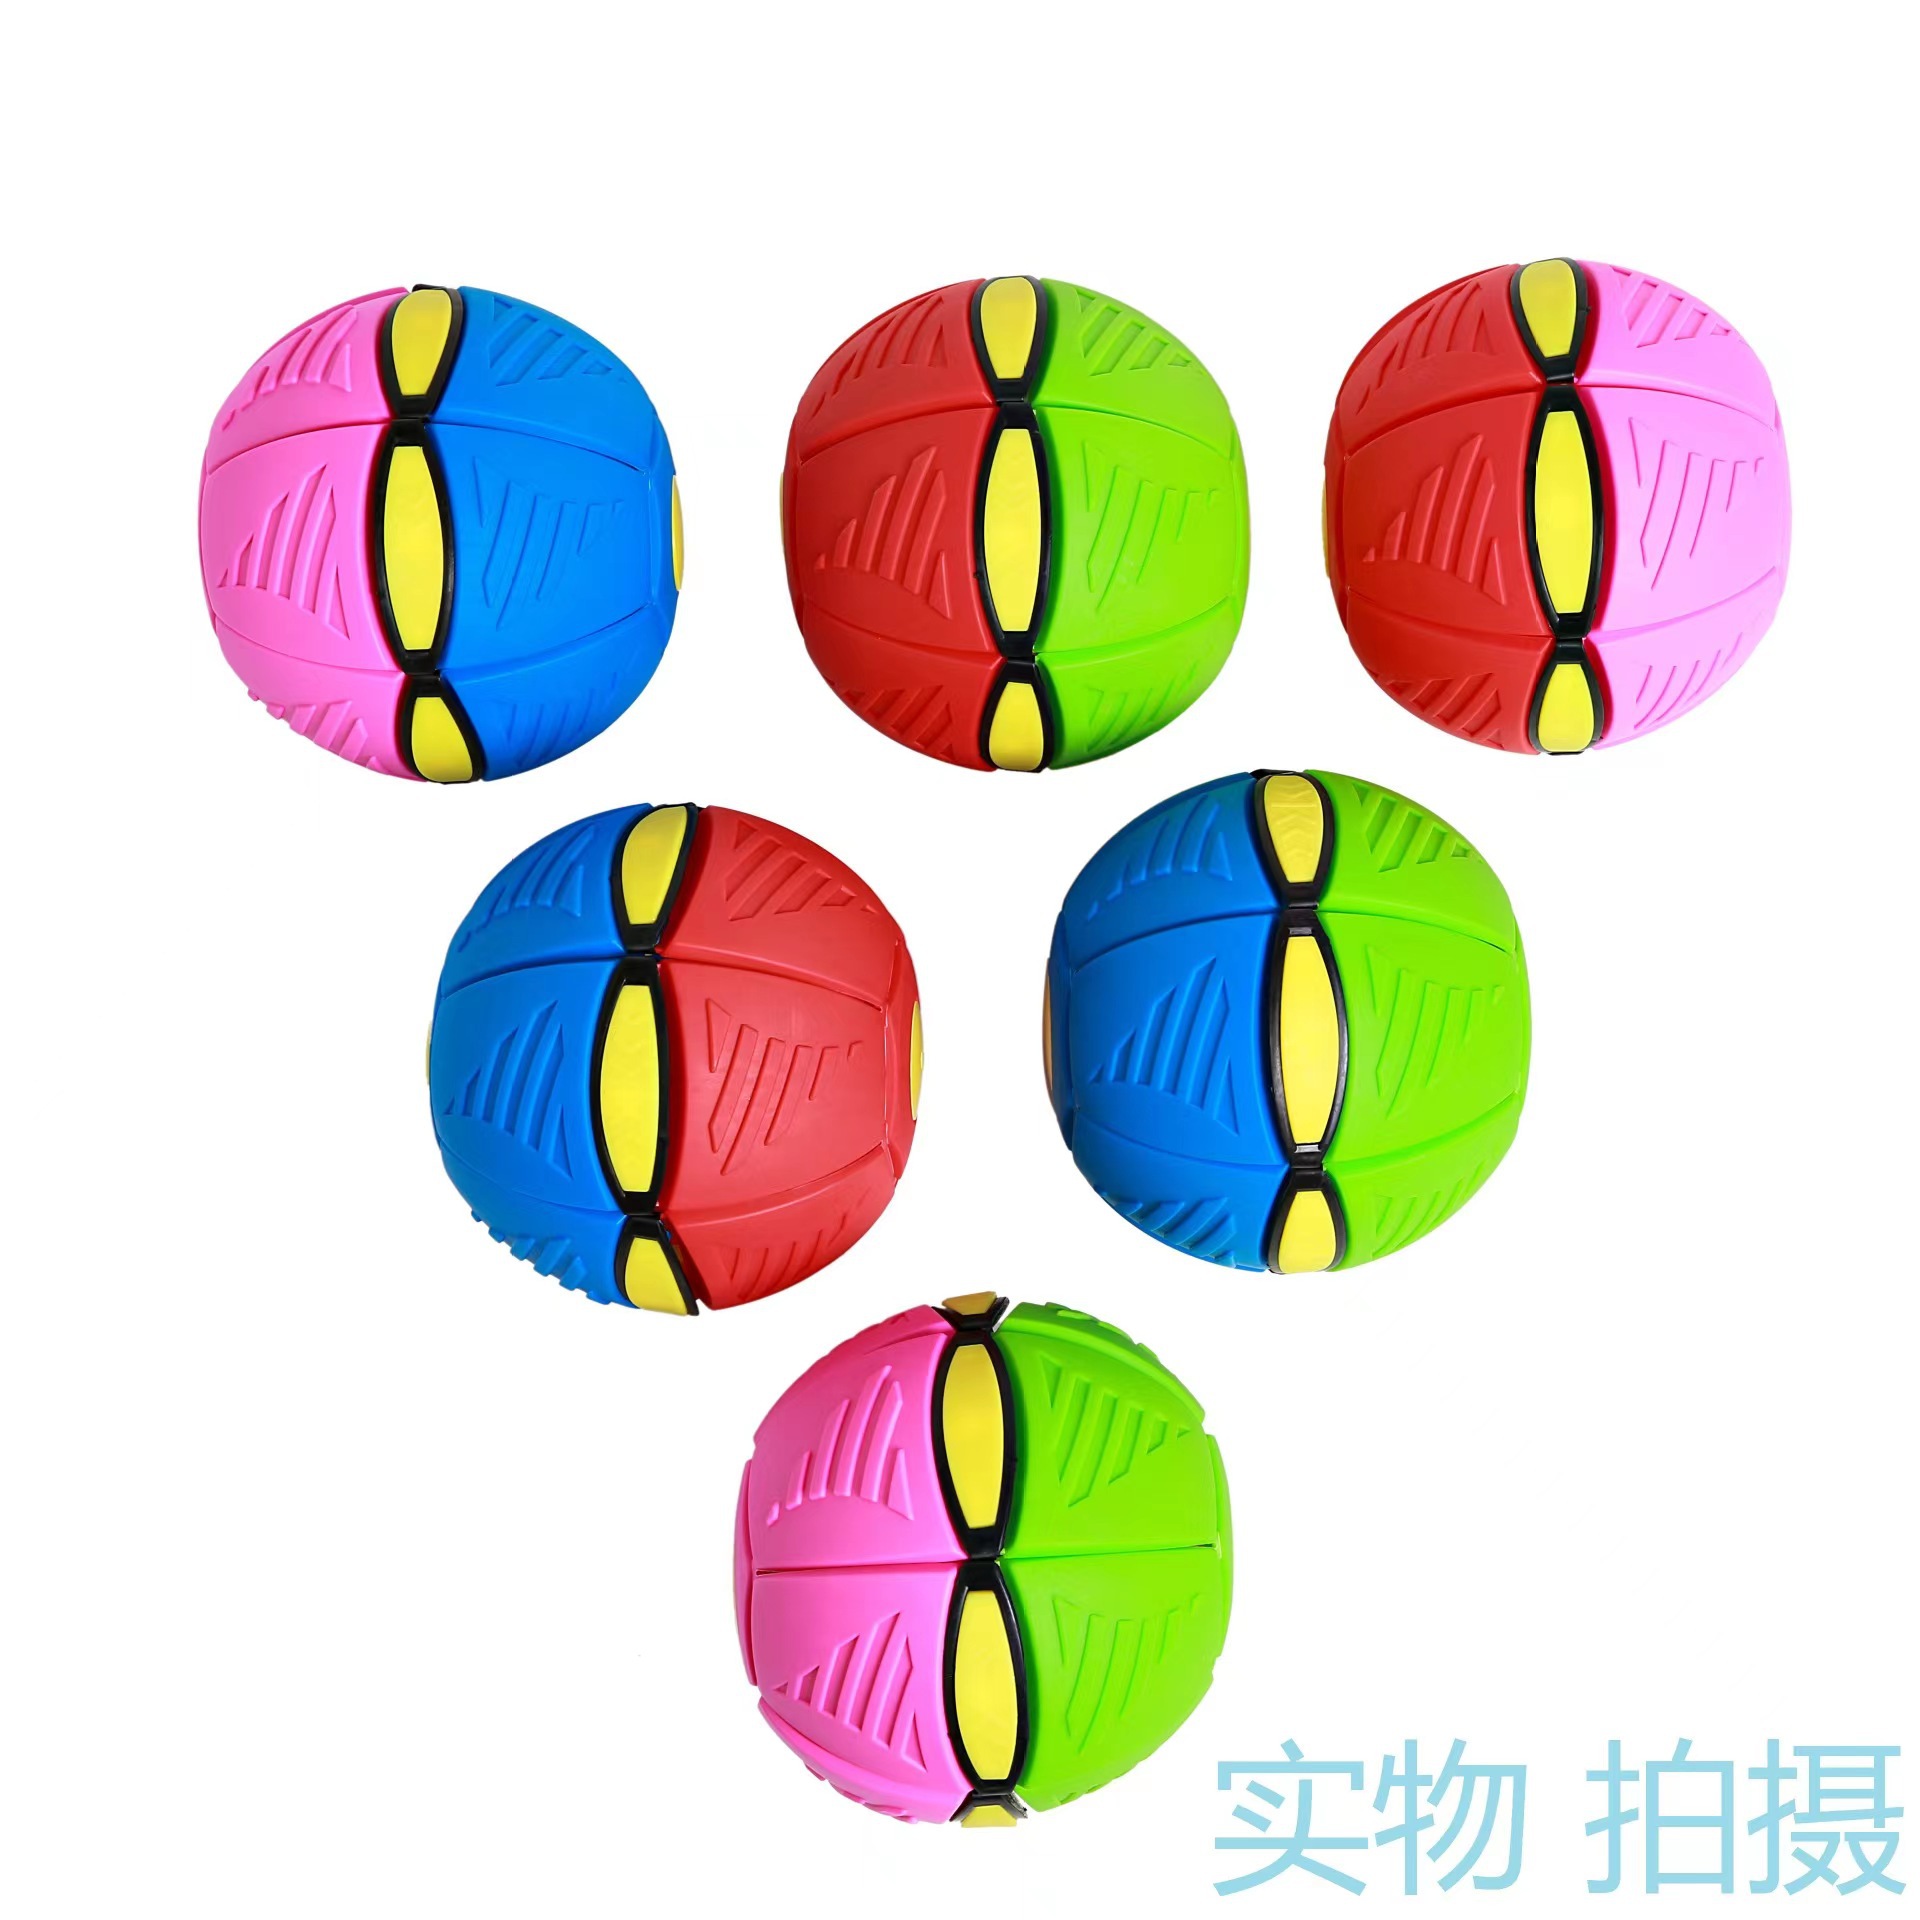 Stall Magic Flying Saucer Ball Stall Foot Toys Children's Toys Luminous Flying Saucer Ball Elastic Football Toys Wholesale